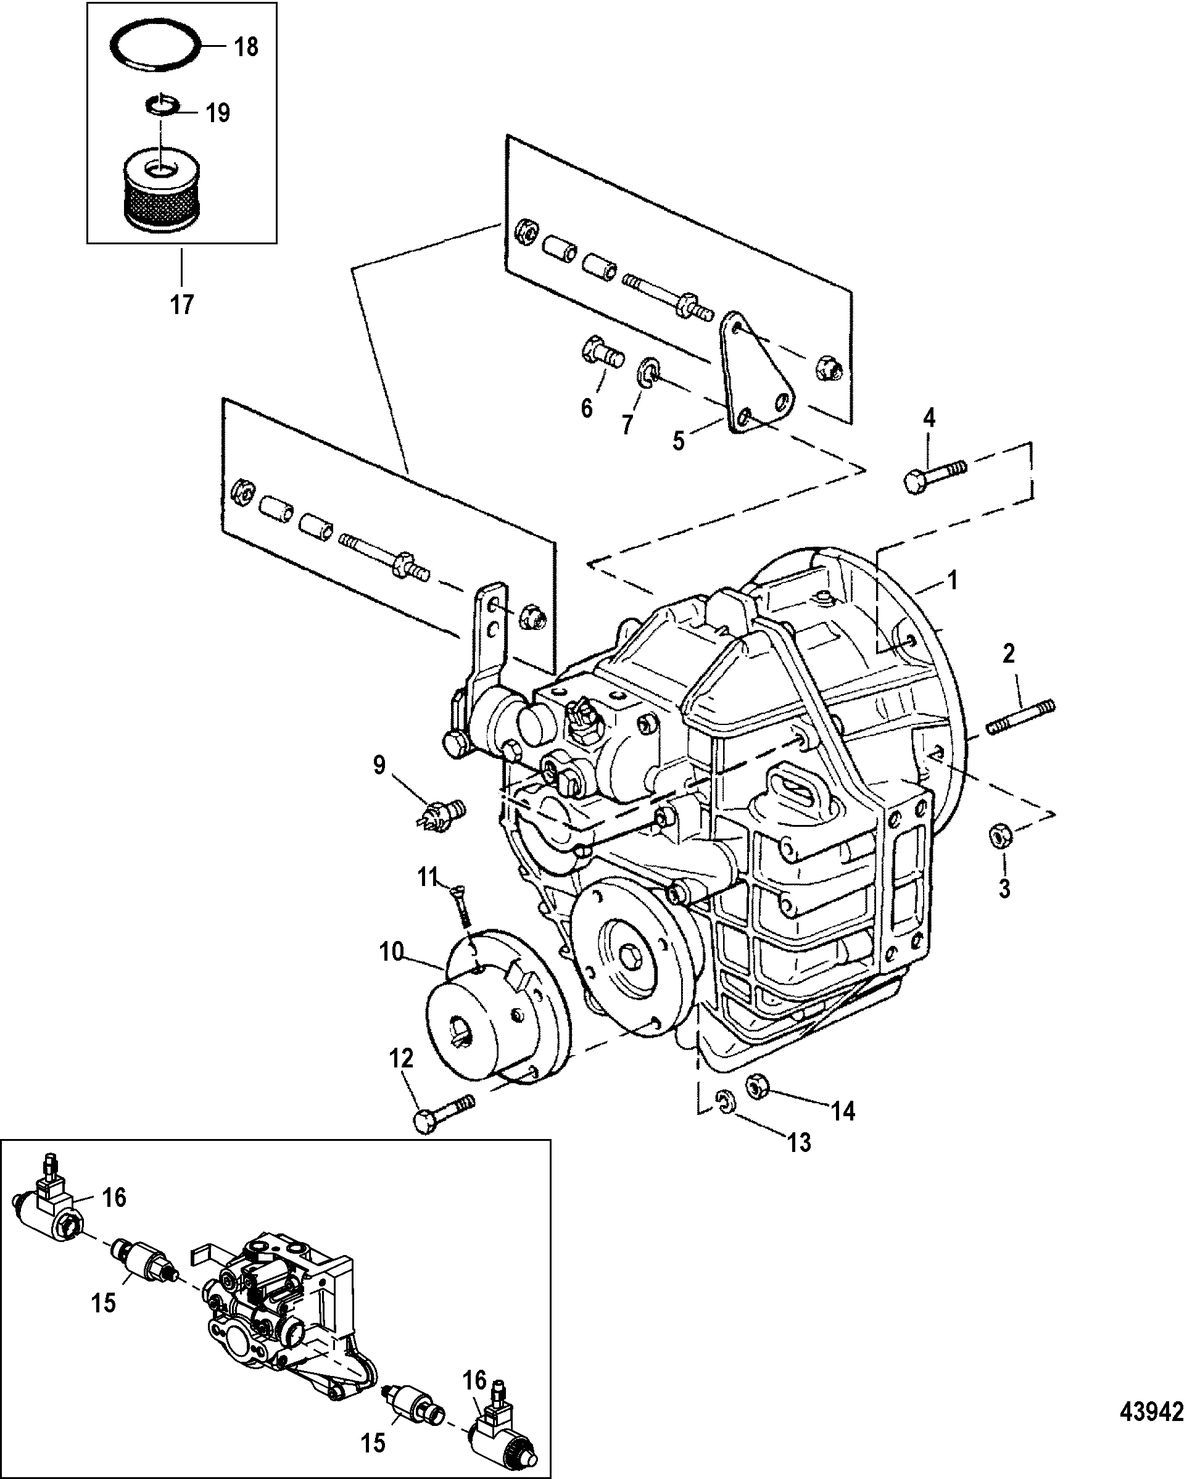 MERCRUISER CUMMINS/MERCRUISER DIESEL QSD-2.8L Transmission and Related Parts(INBOARD)